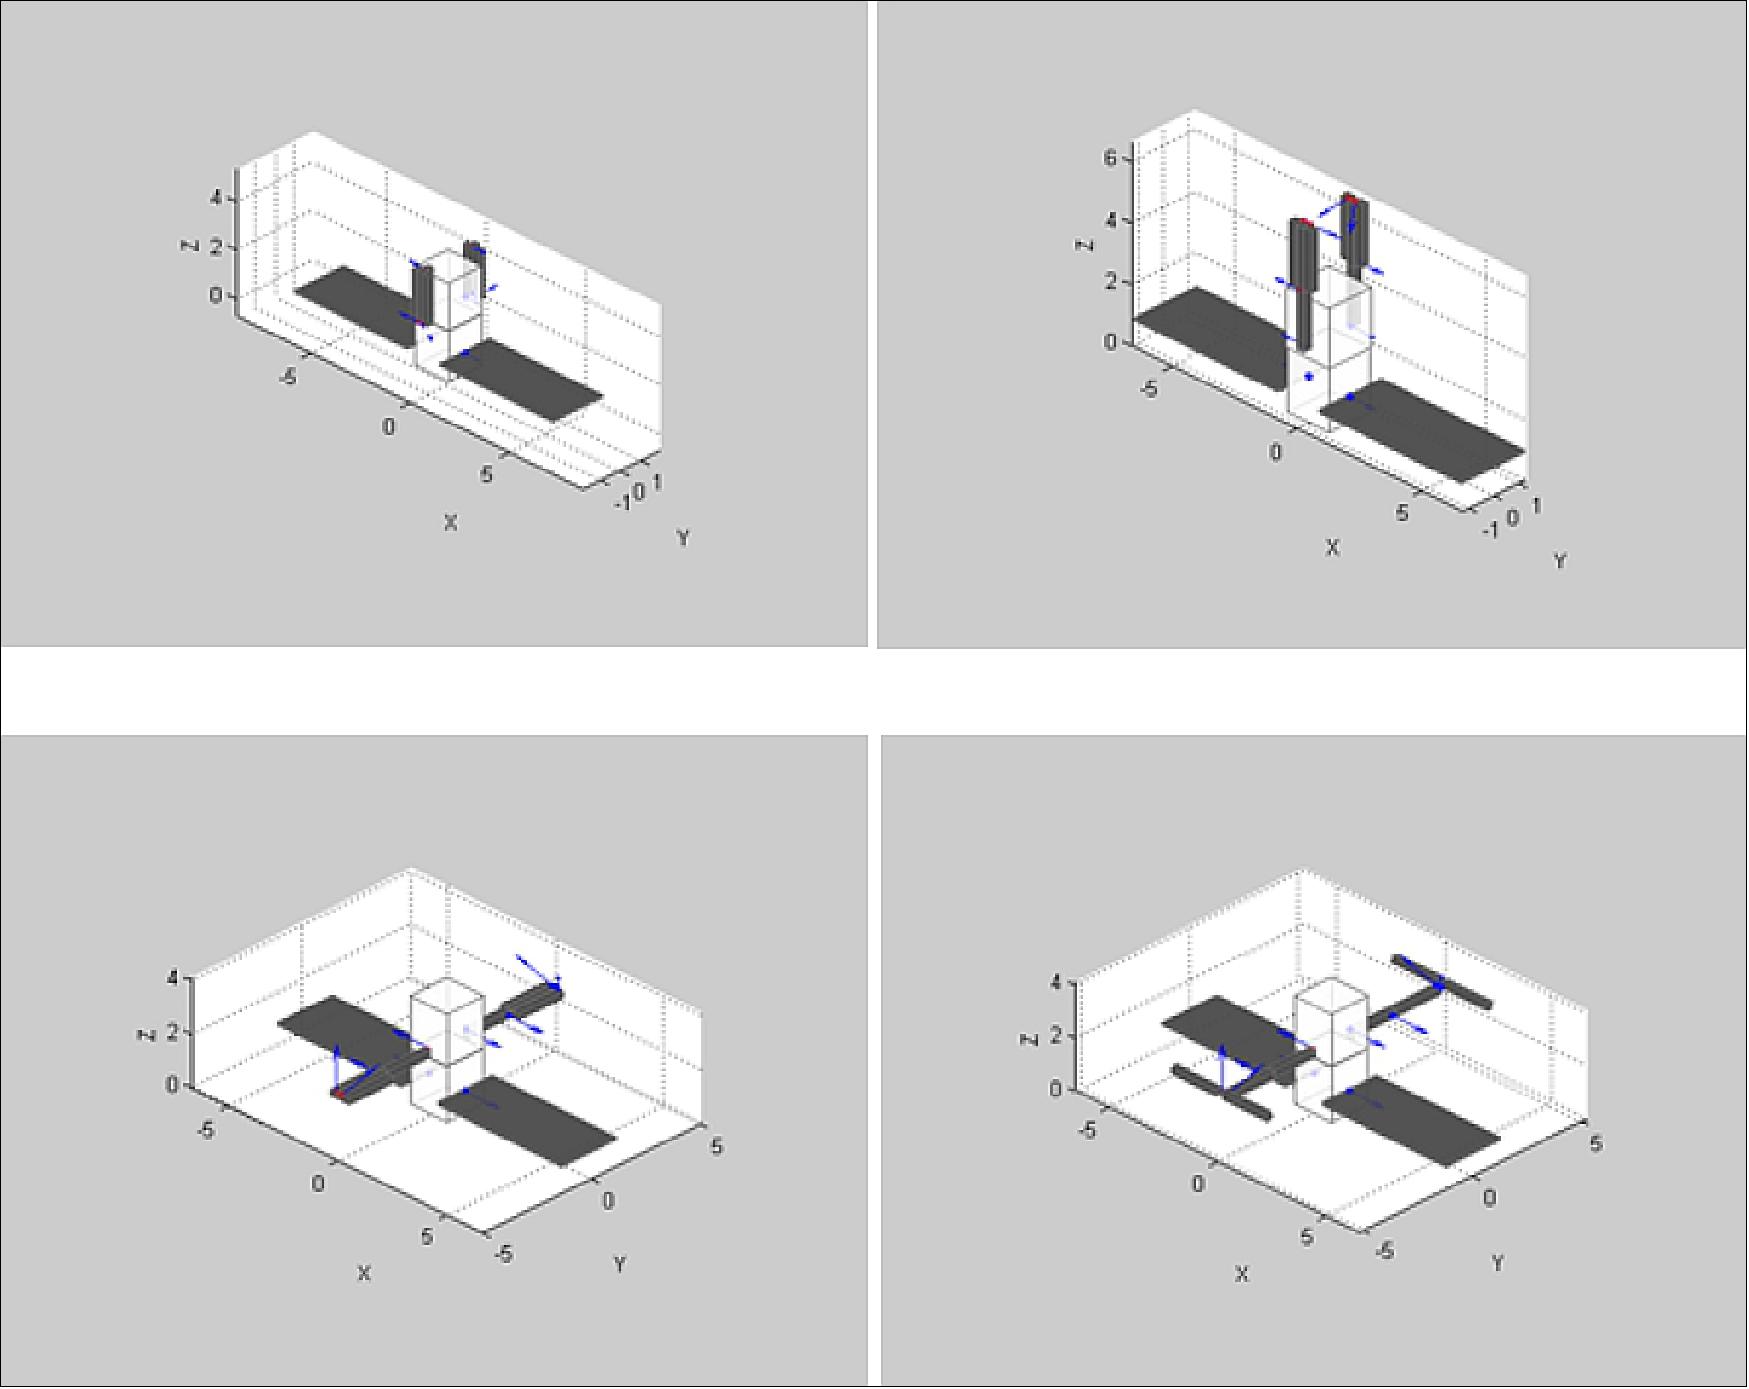 Figure 13: Deployment sequence in 3 steps (image credit: TAS, CNES)